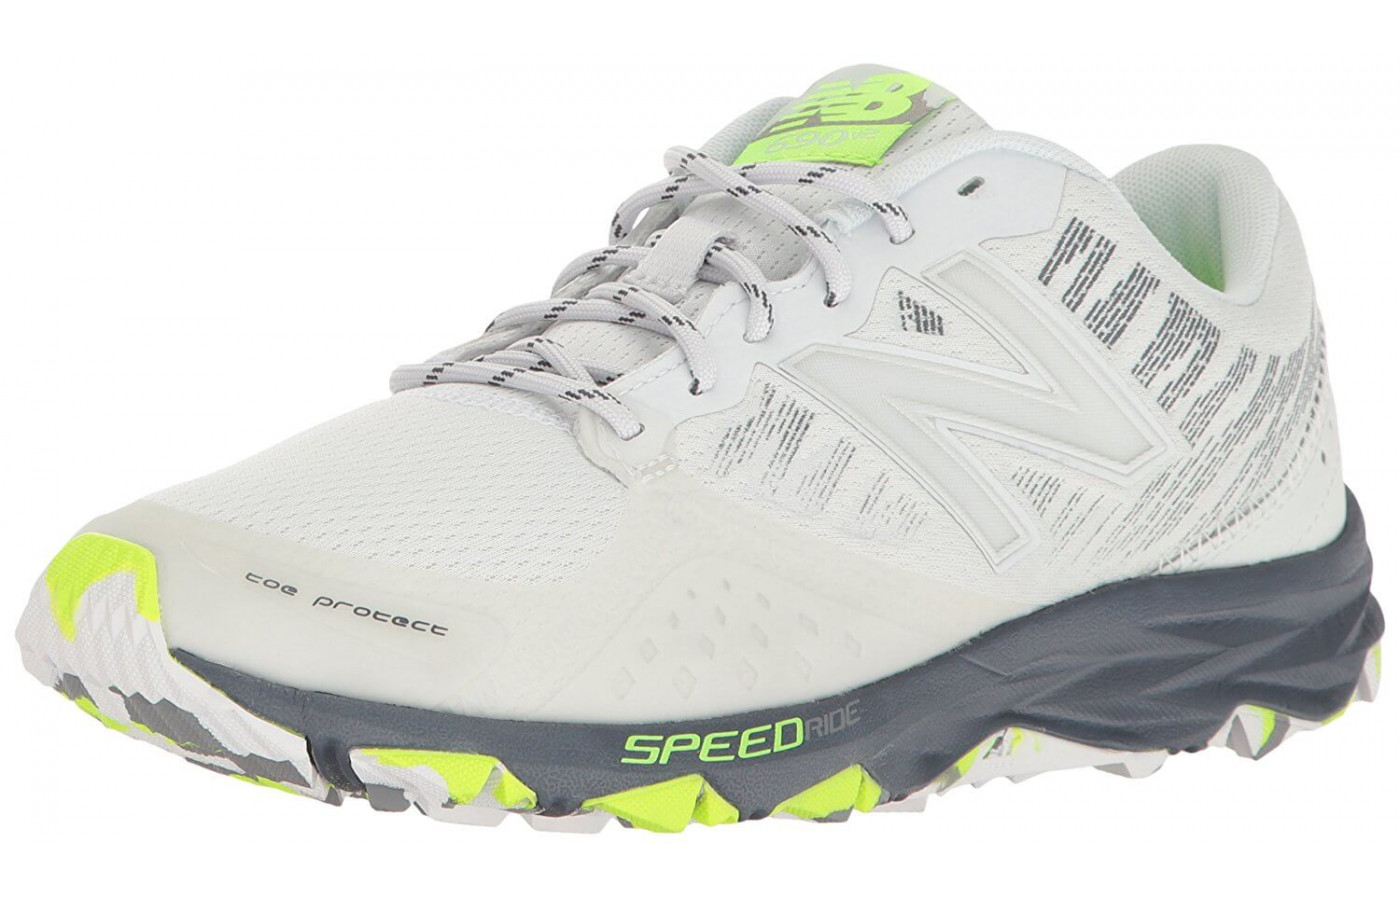 The 690v2 Trail is available in a number of vibrant color options